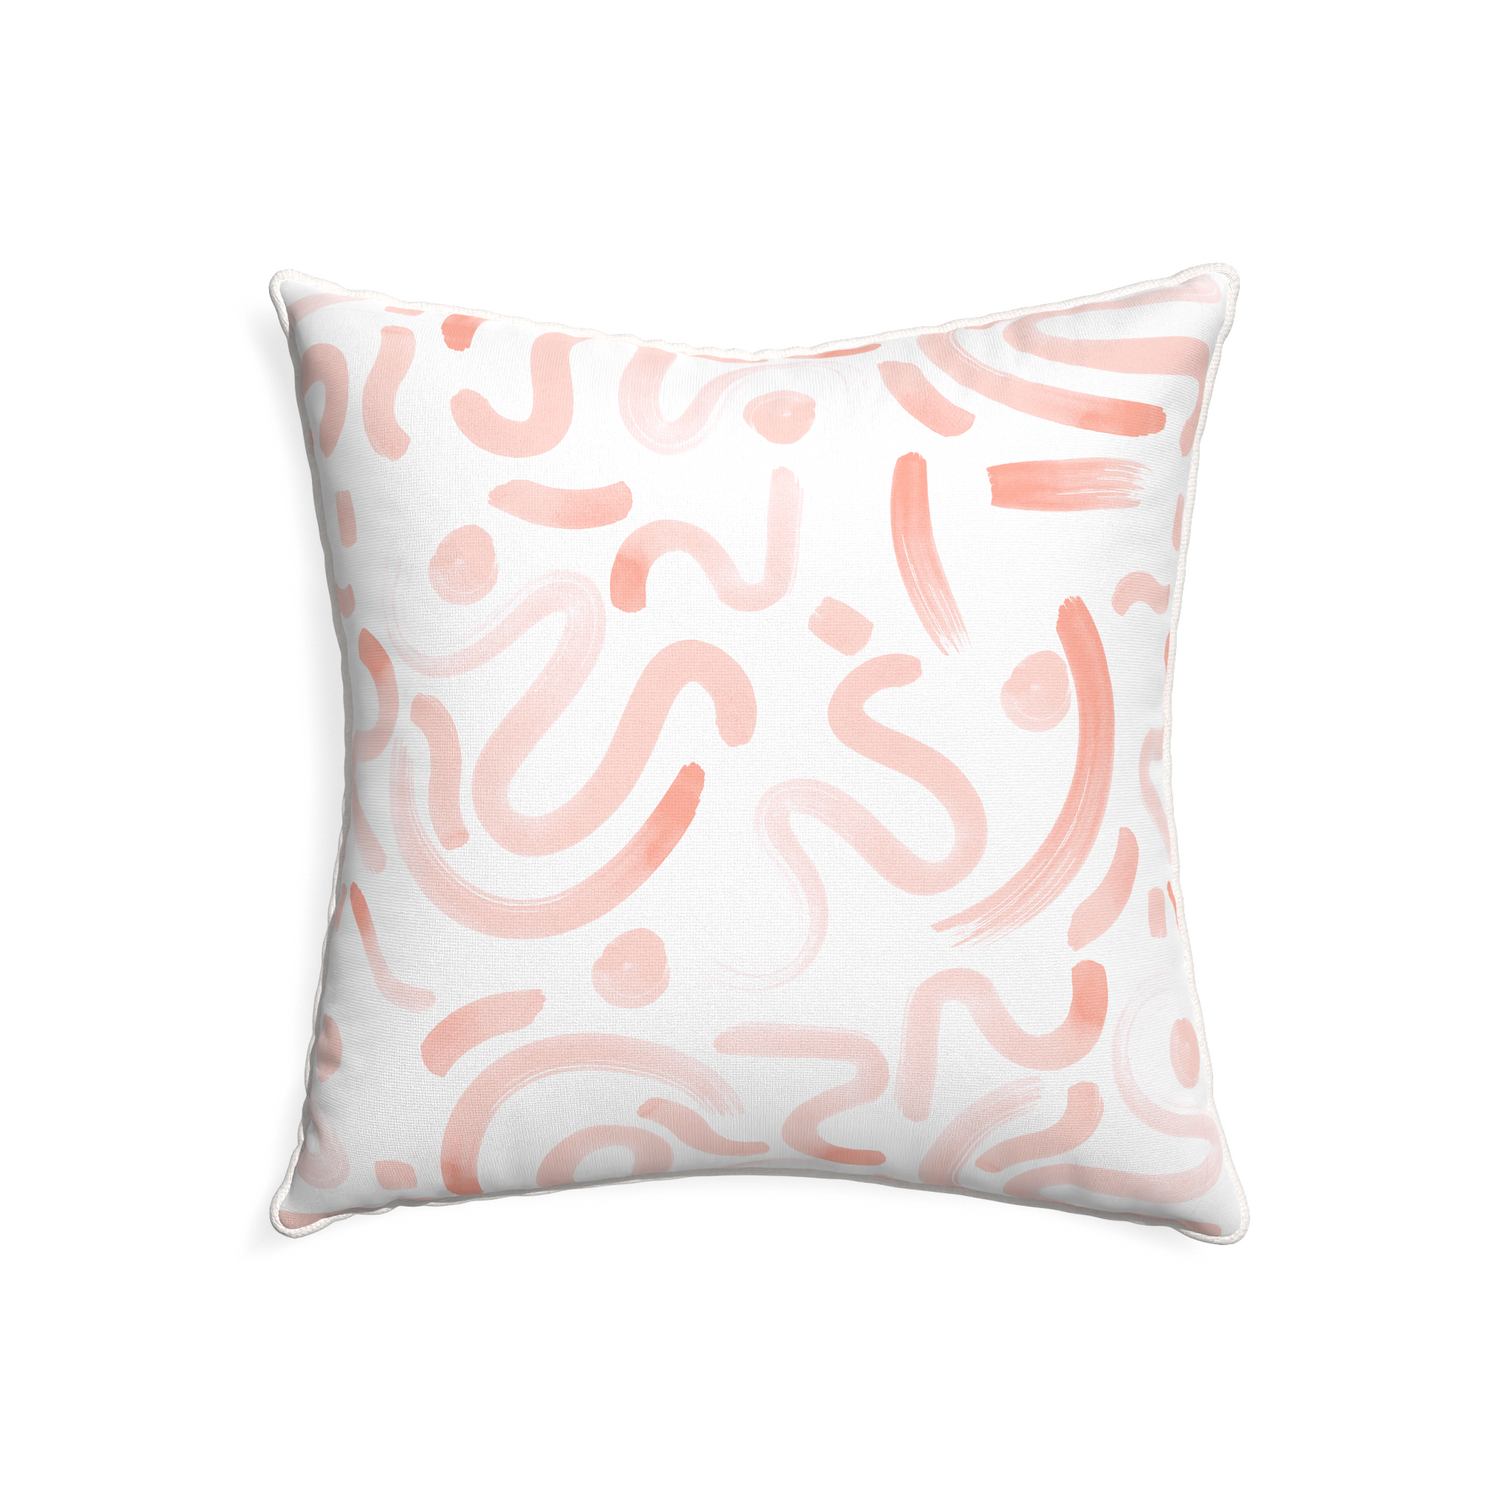 22-square hockney pink custom pink graphicpillow with snow piping on white background